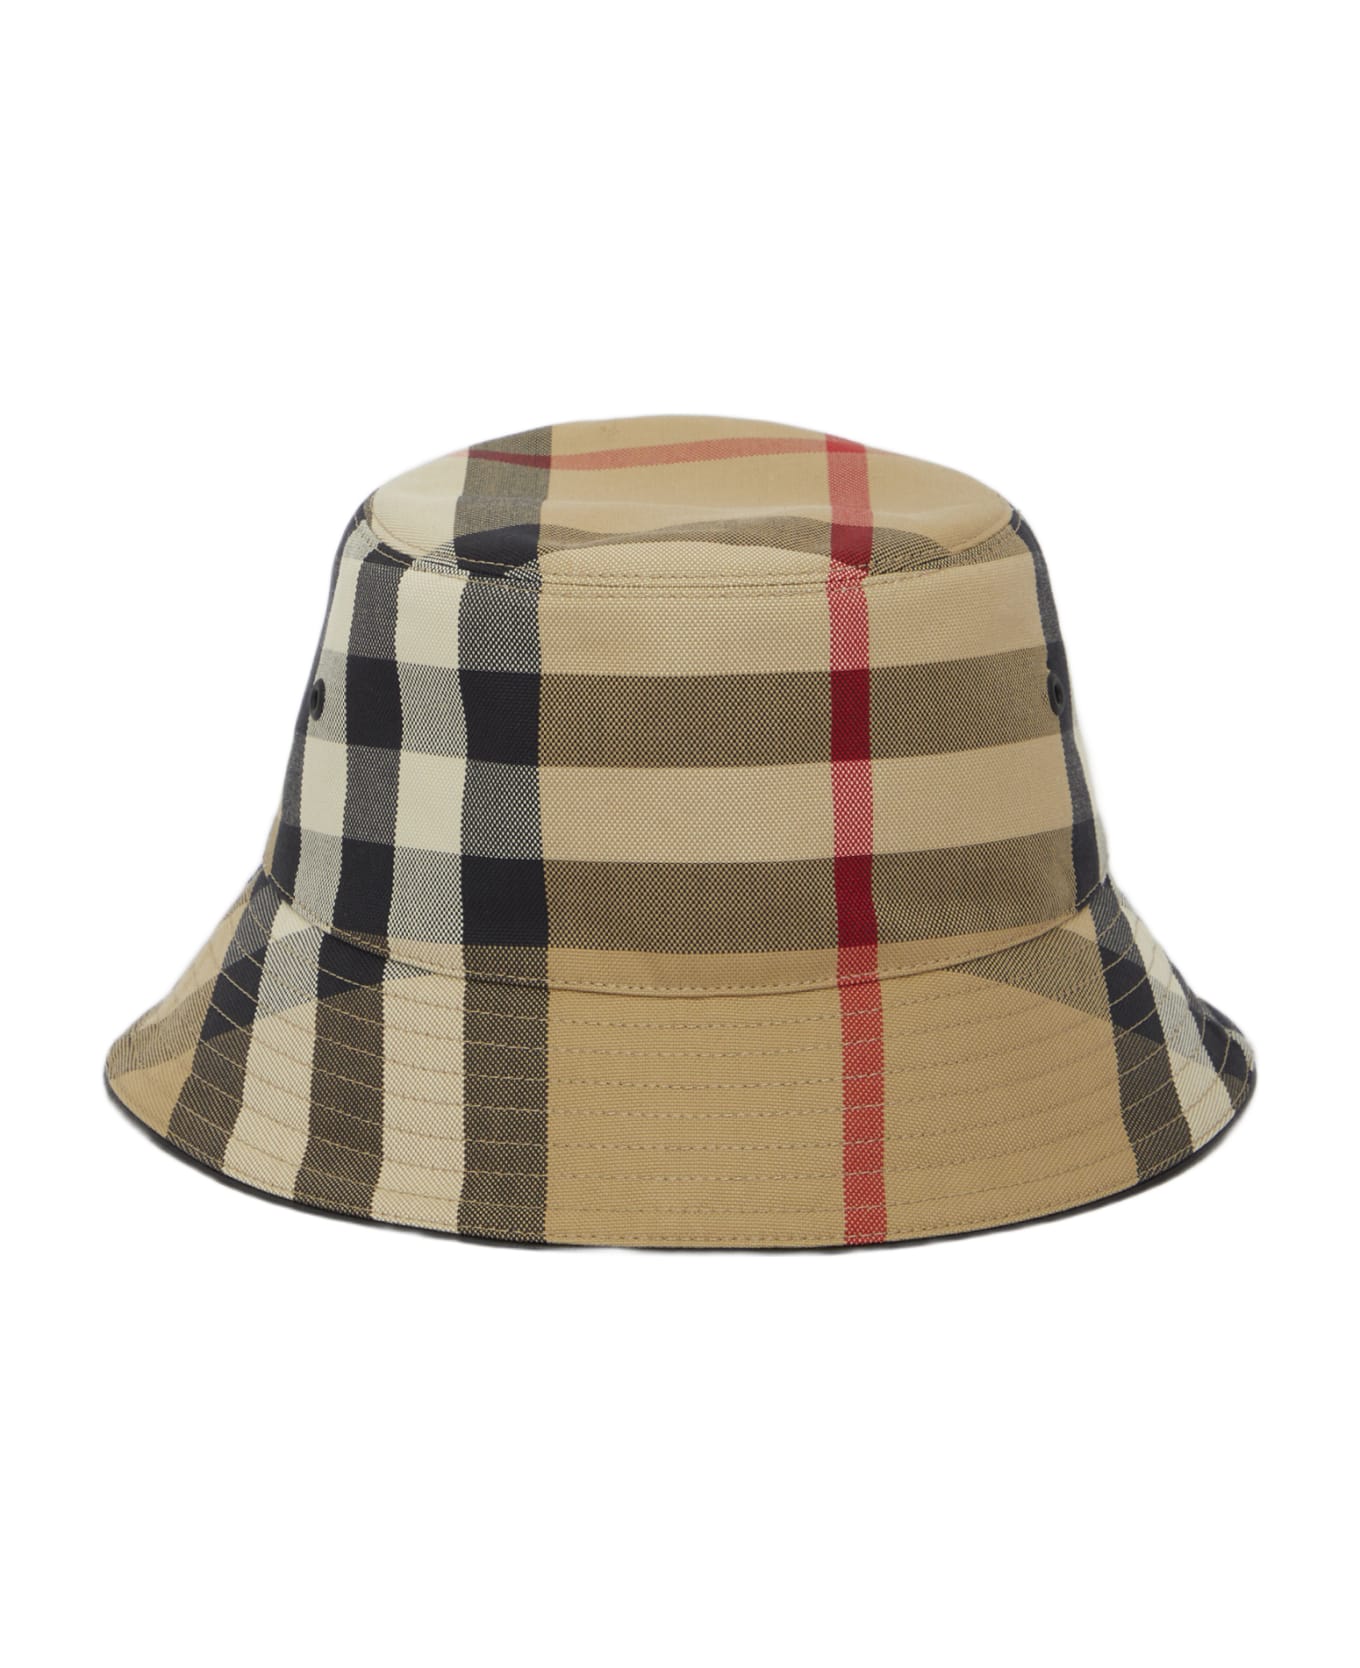 Burberry Exaggerated Check Bucket Hat - BEIGE